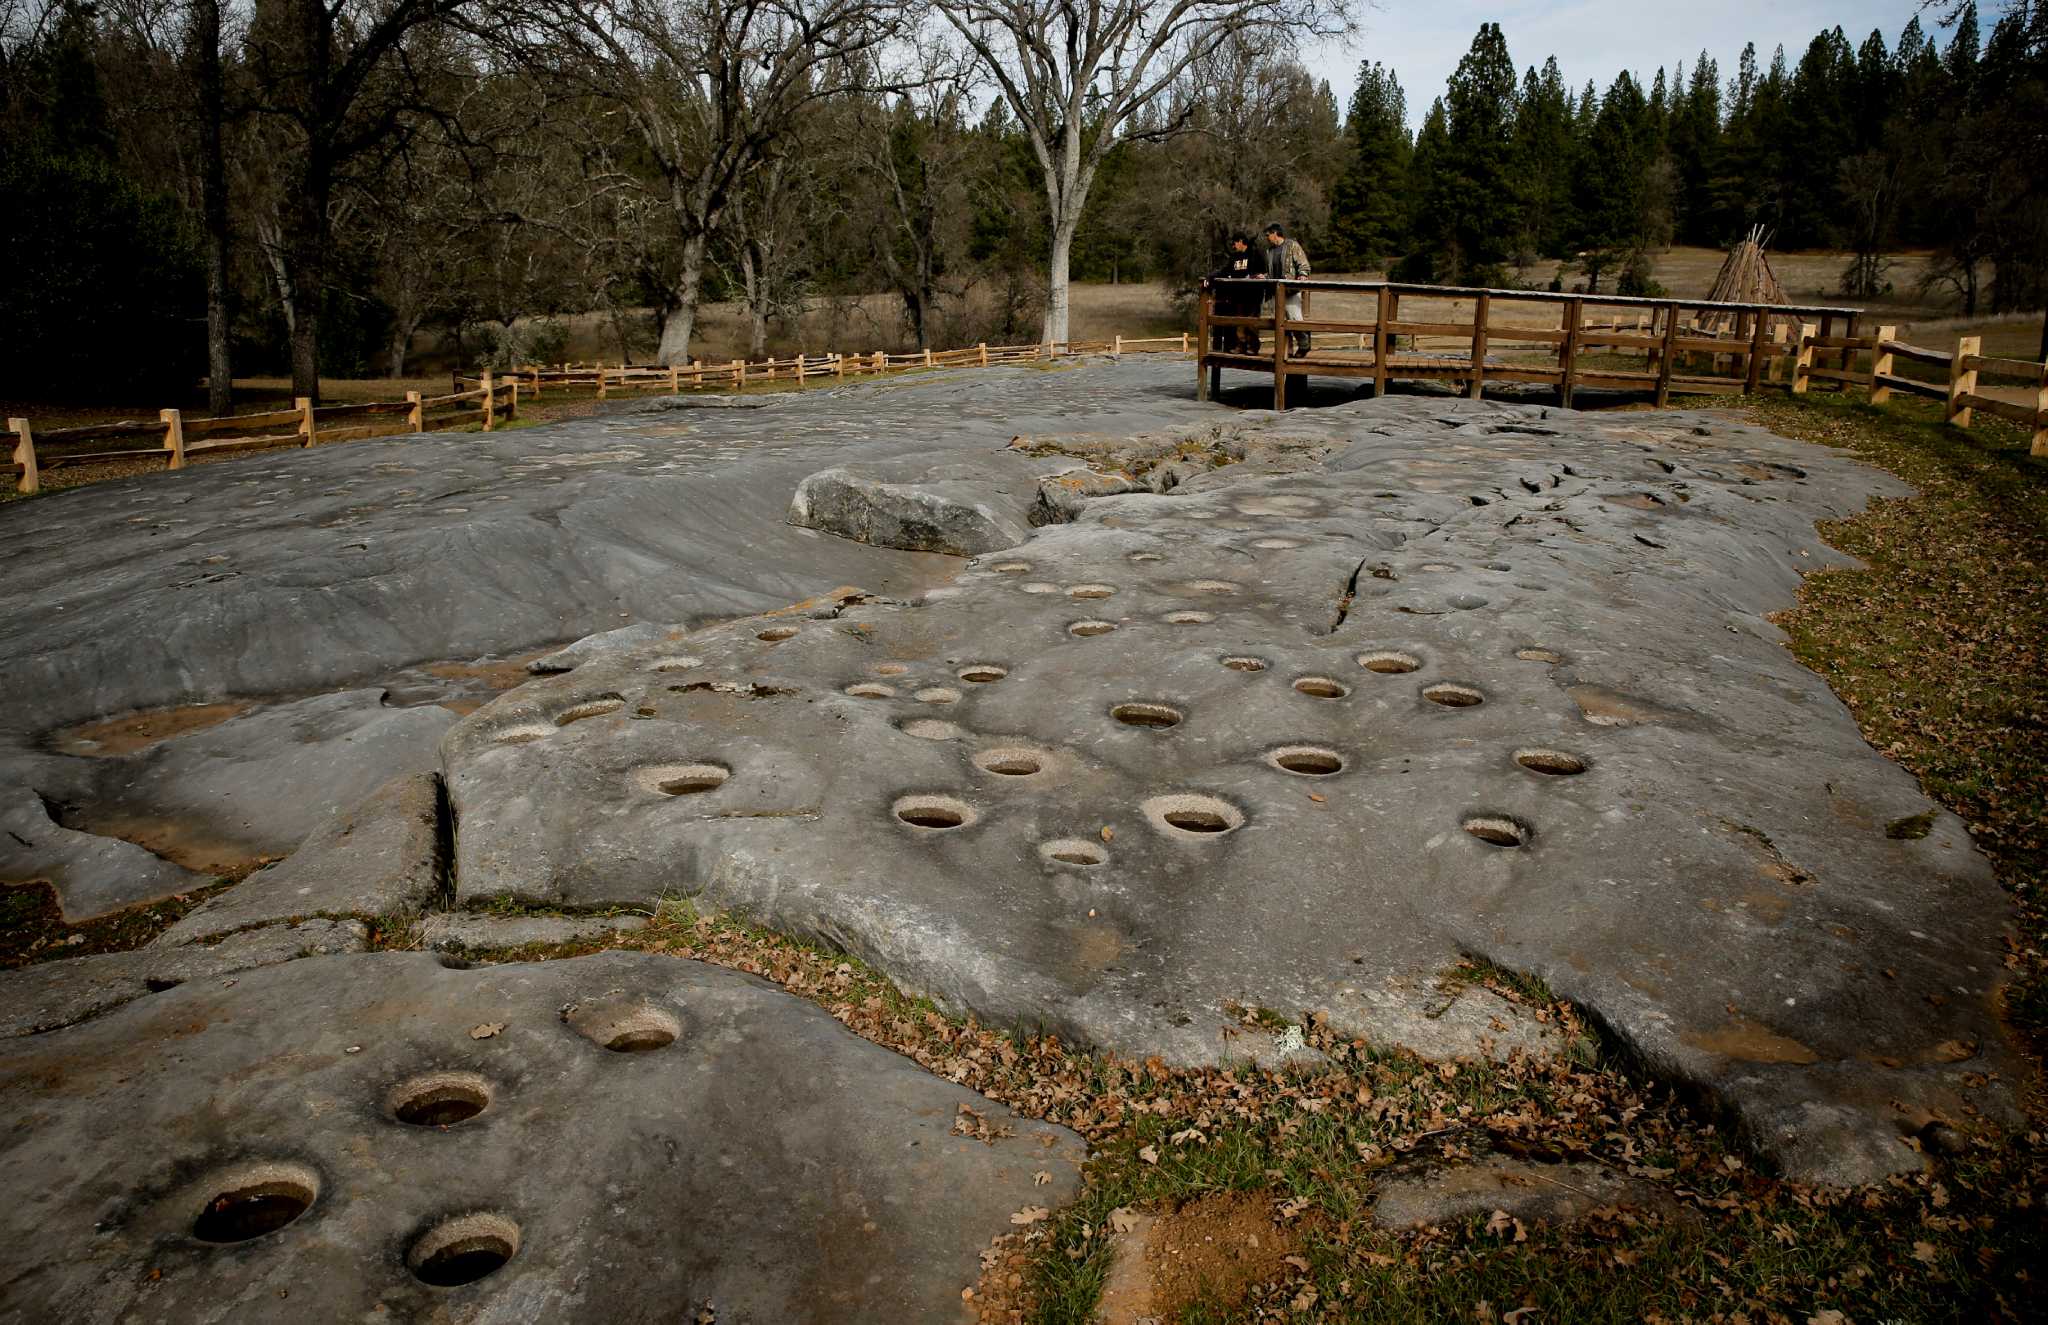 Amador County: Miwuk tribe gives back by revitalizing parks - SFGate